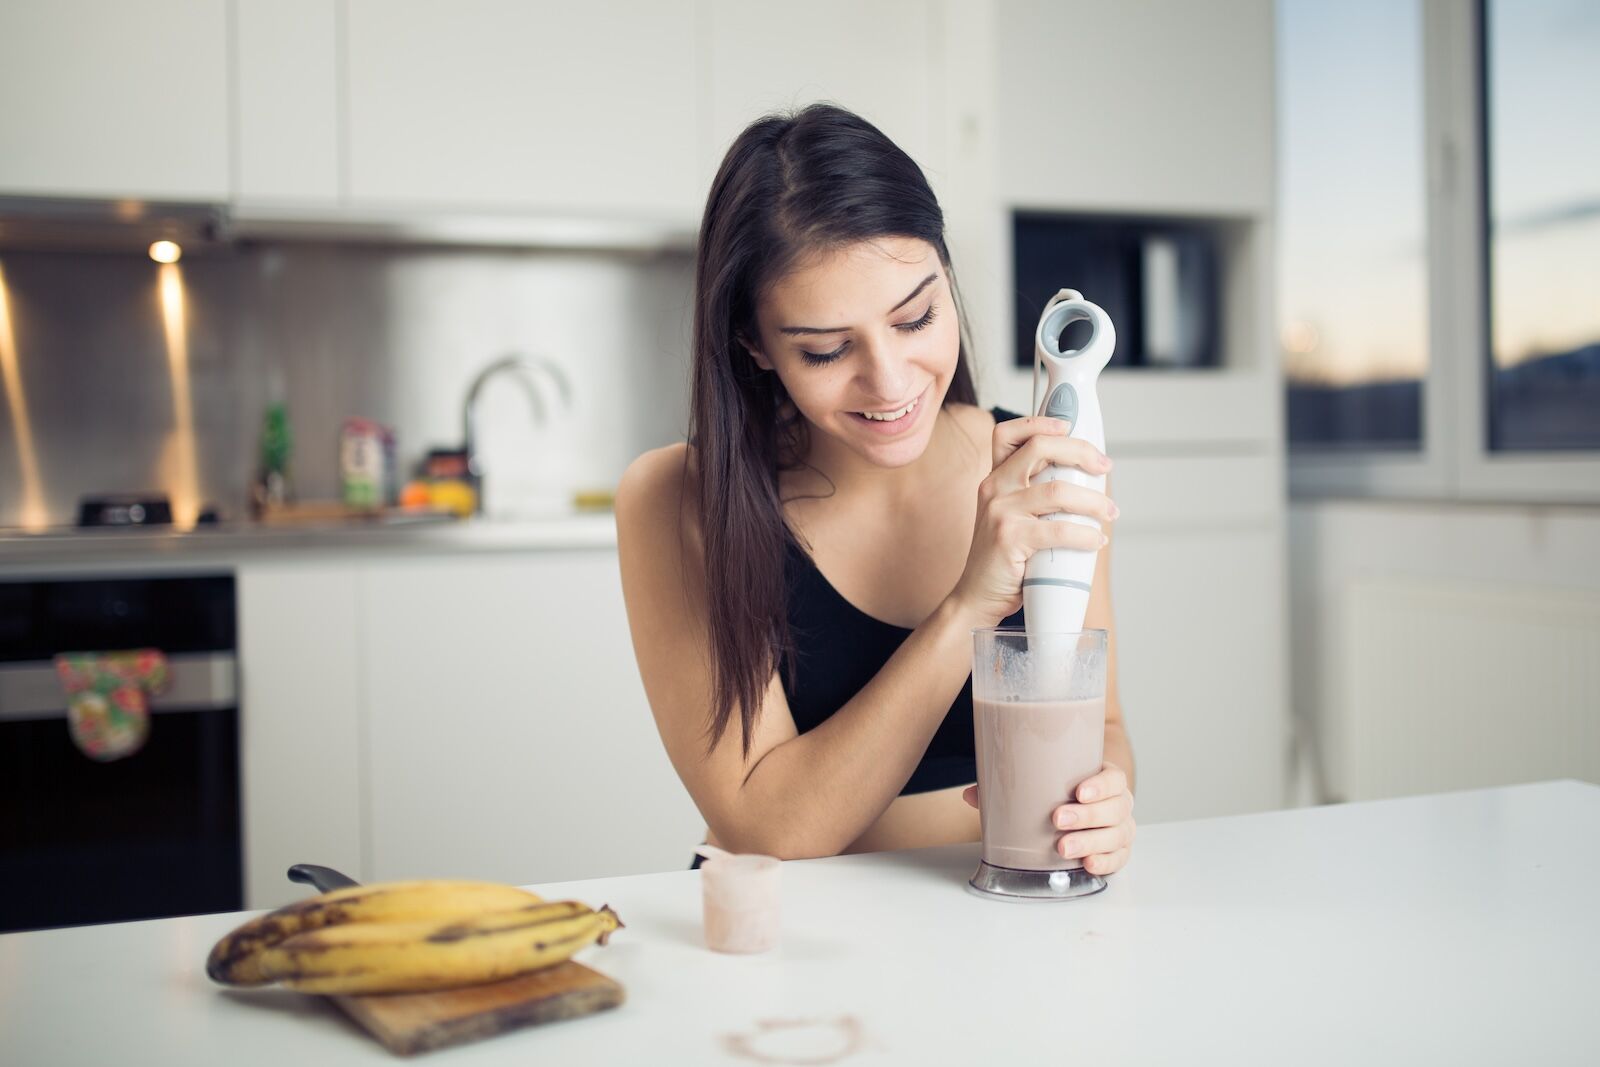 Woman,With,Hand,Blender,Making,Sweet,Banana,Chocolate,Protein,Powder